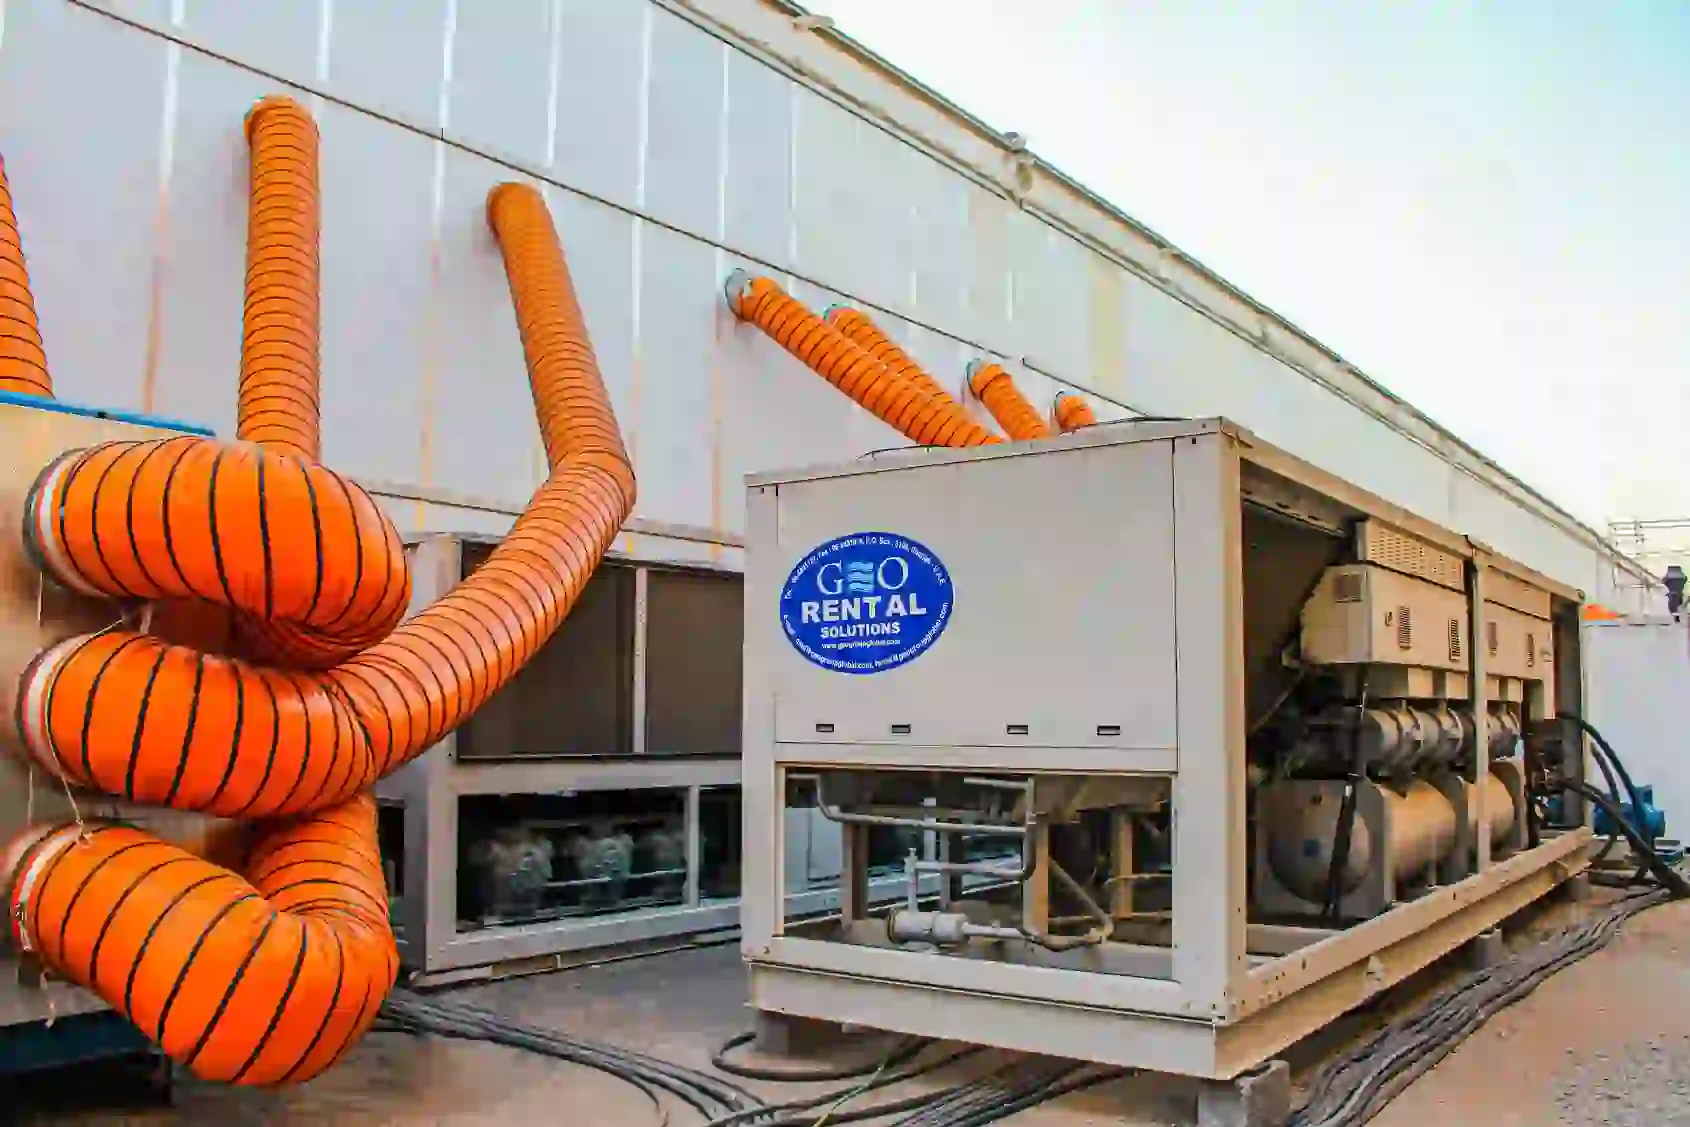 Rental Site, Air handling unit, Air cooled chiller, flexible duct, Geo Rental Solutions